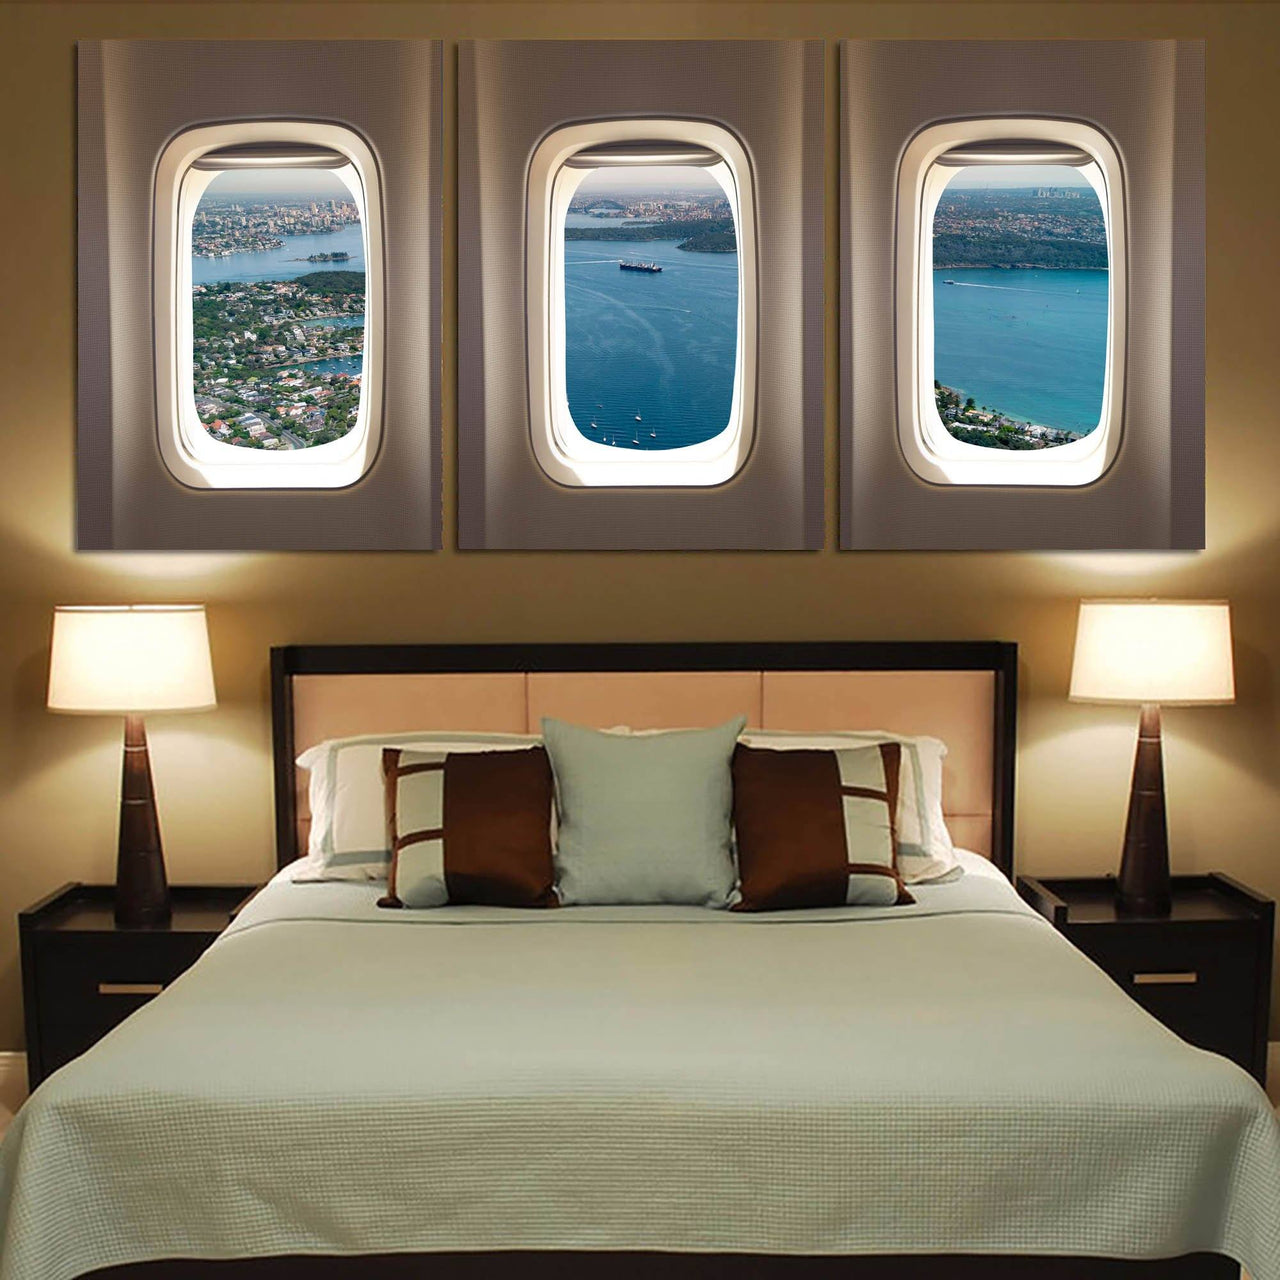 City view & River through Airplane Windows Printed Canvas Posters (3 Pieces) Aviation Shop 